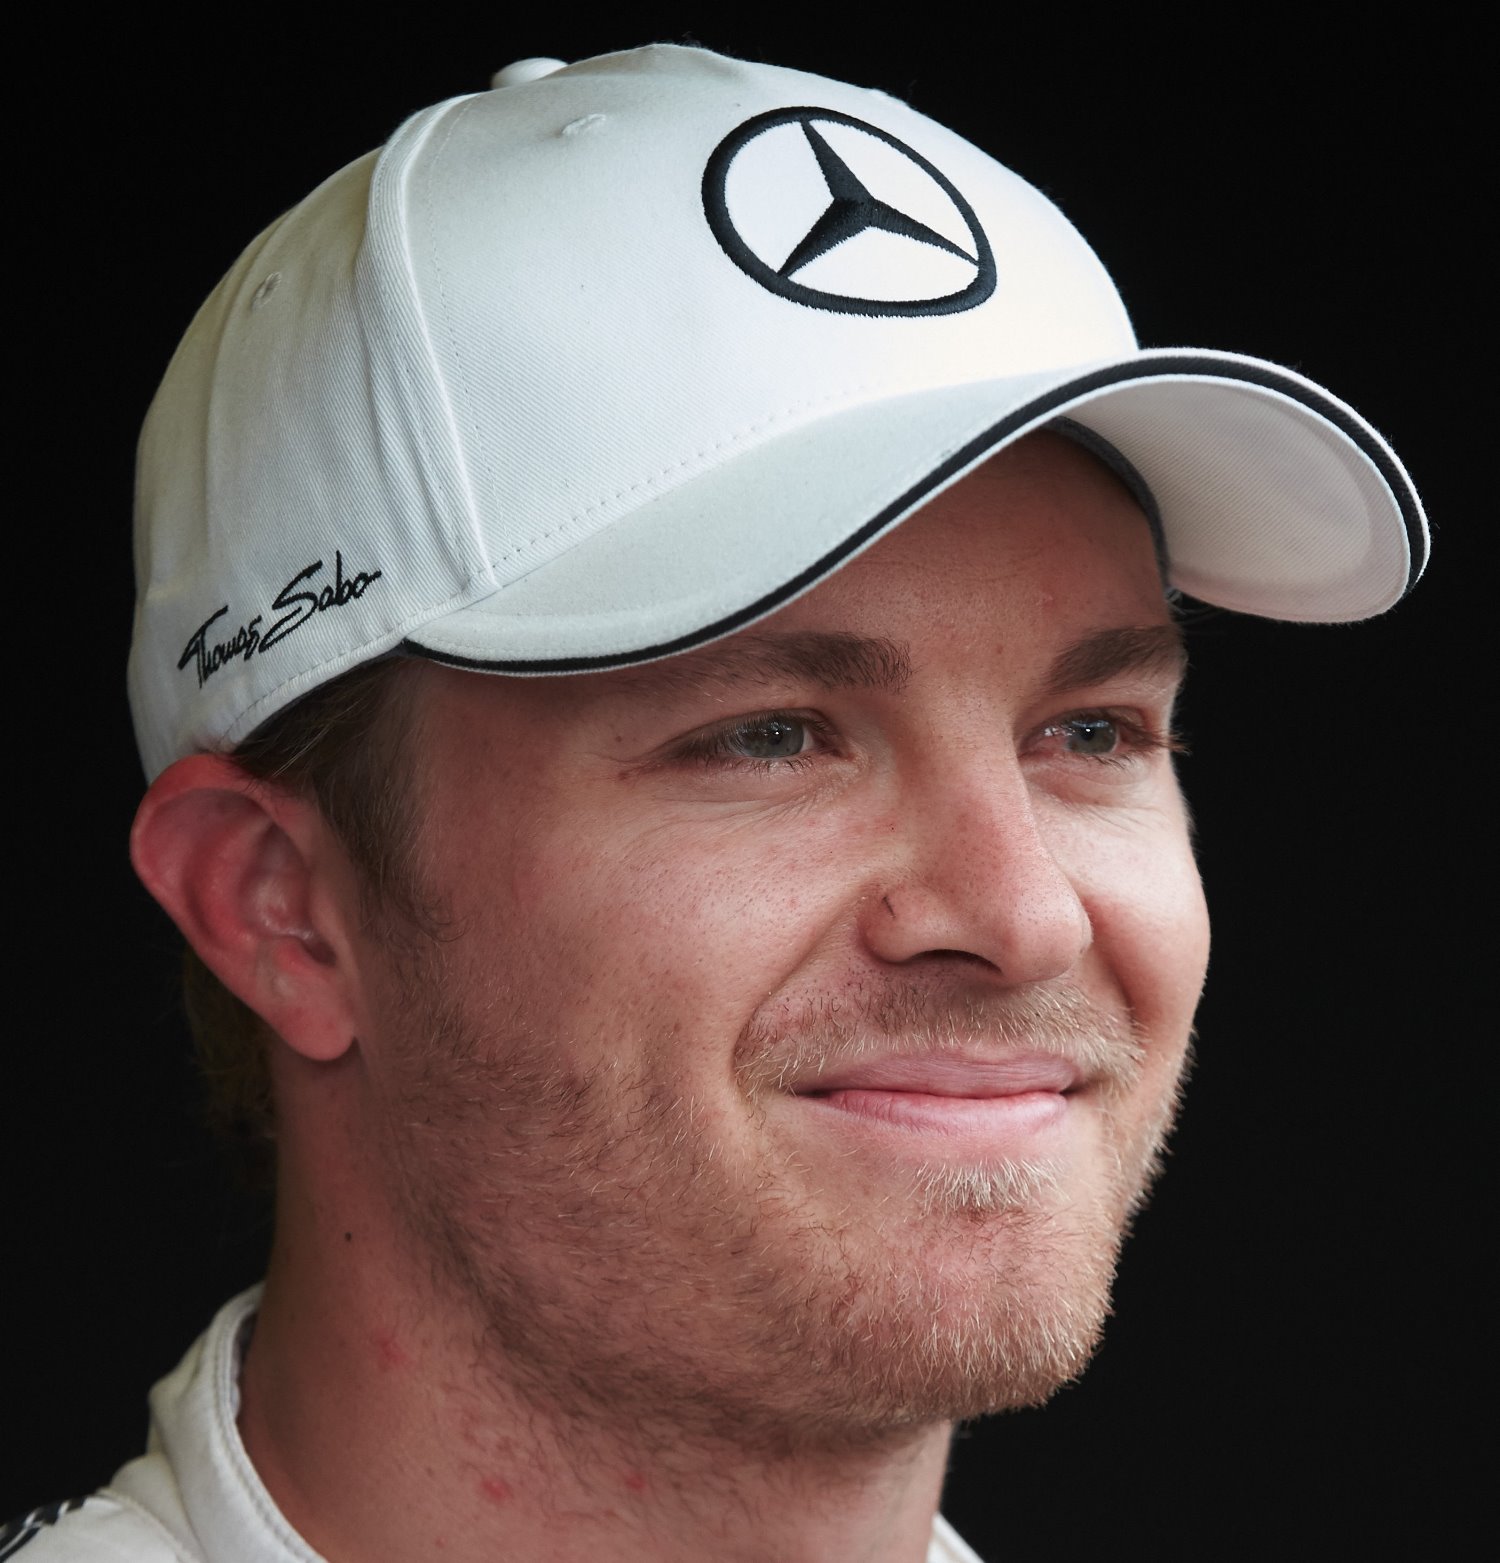 Has Mercedes decided to make Rosberg World Champion in 2016?